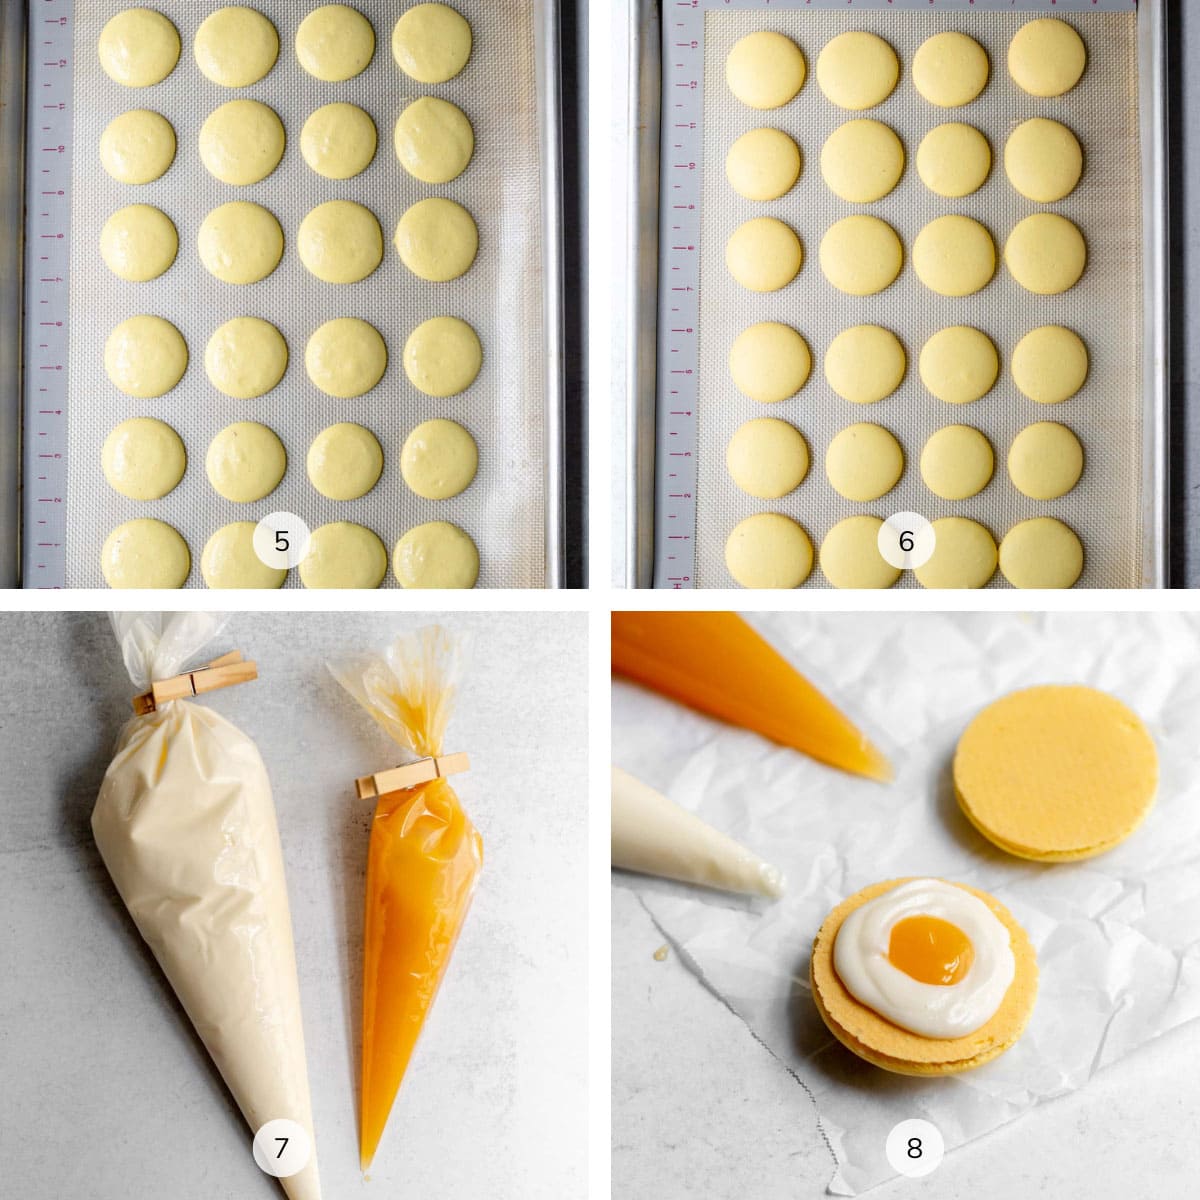 Photos showing the steps of making lemon macarons labeled 5, 6, 7, 8